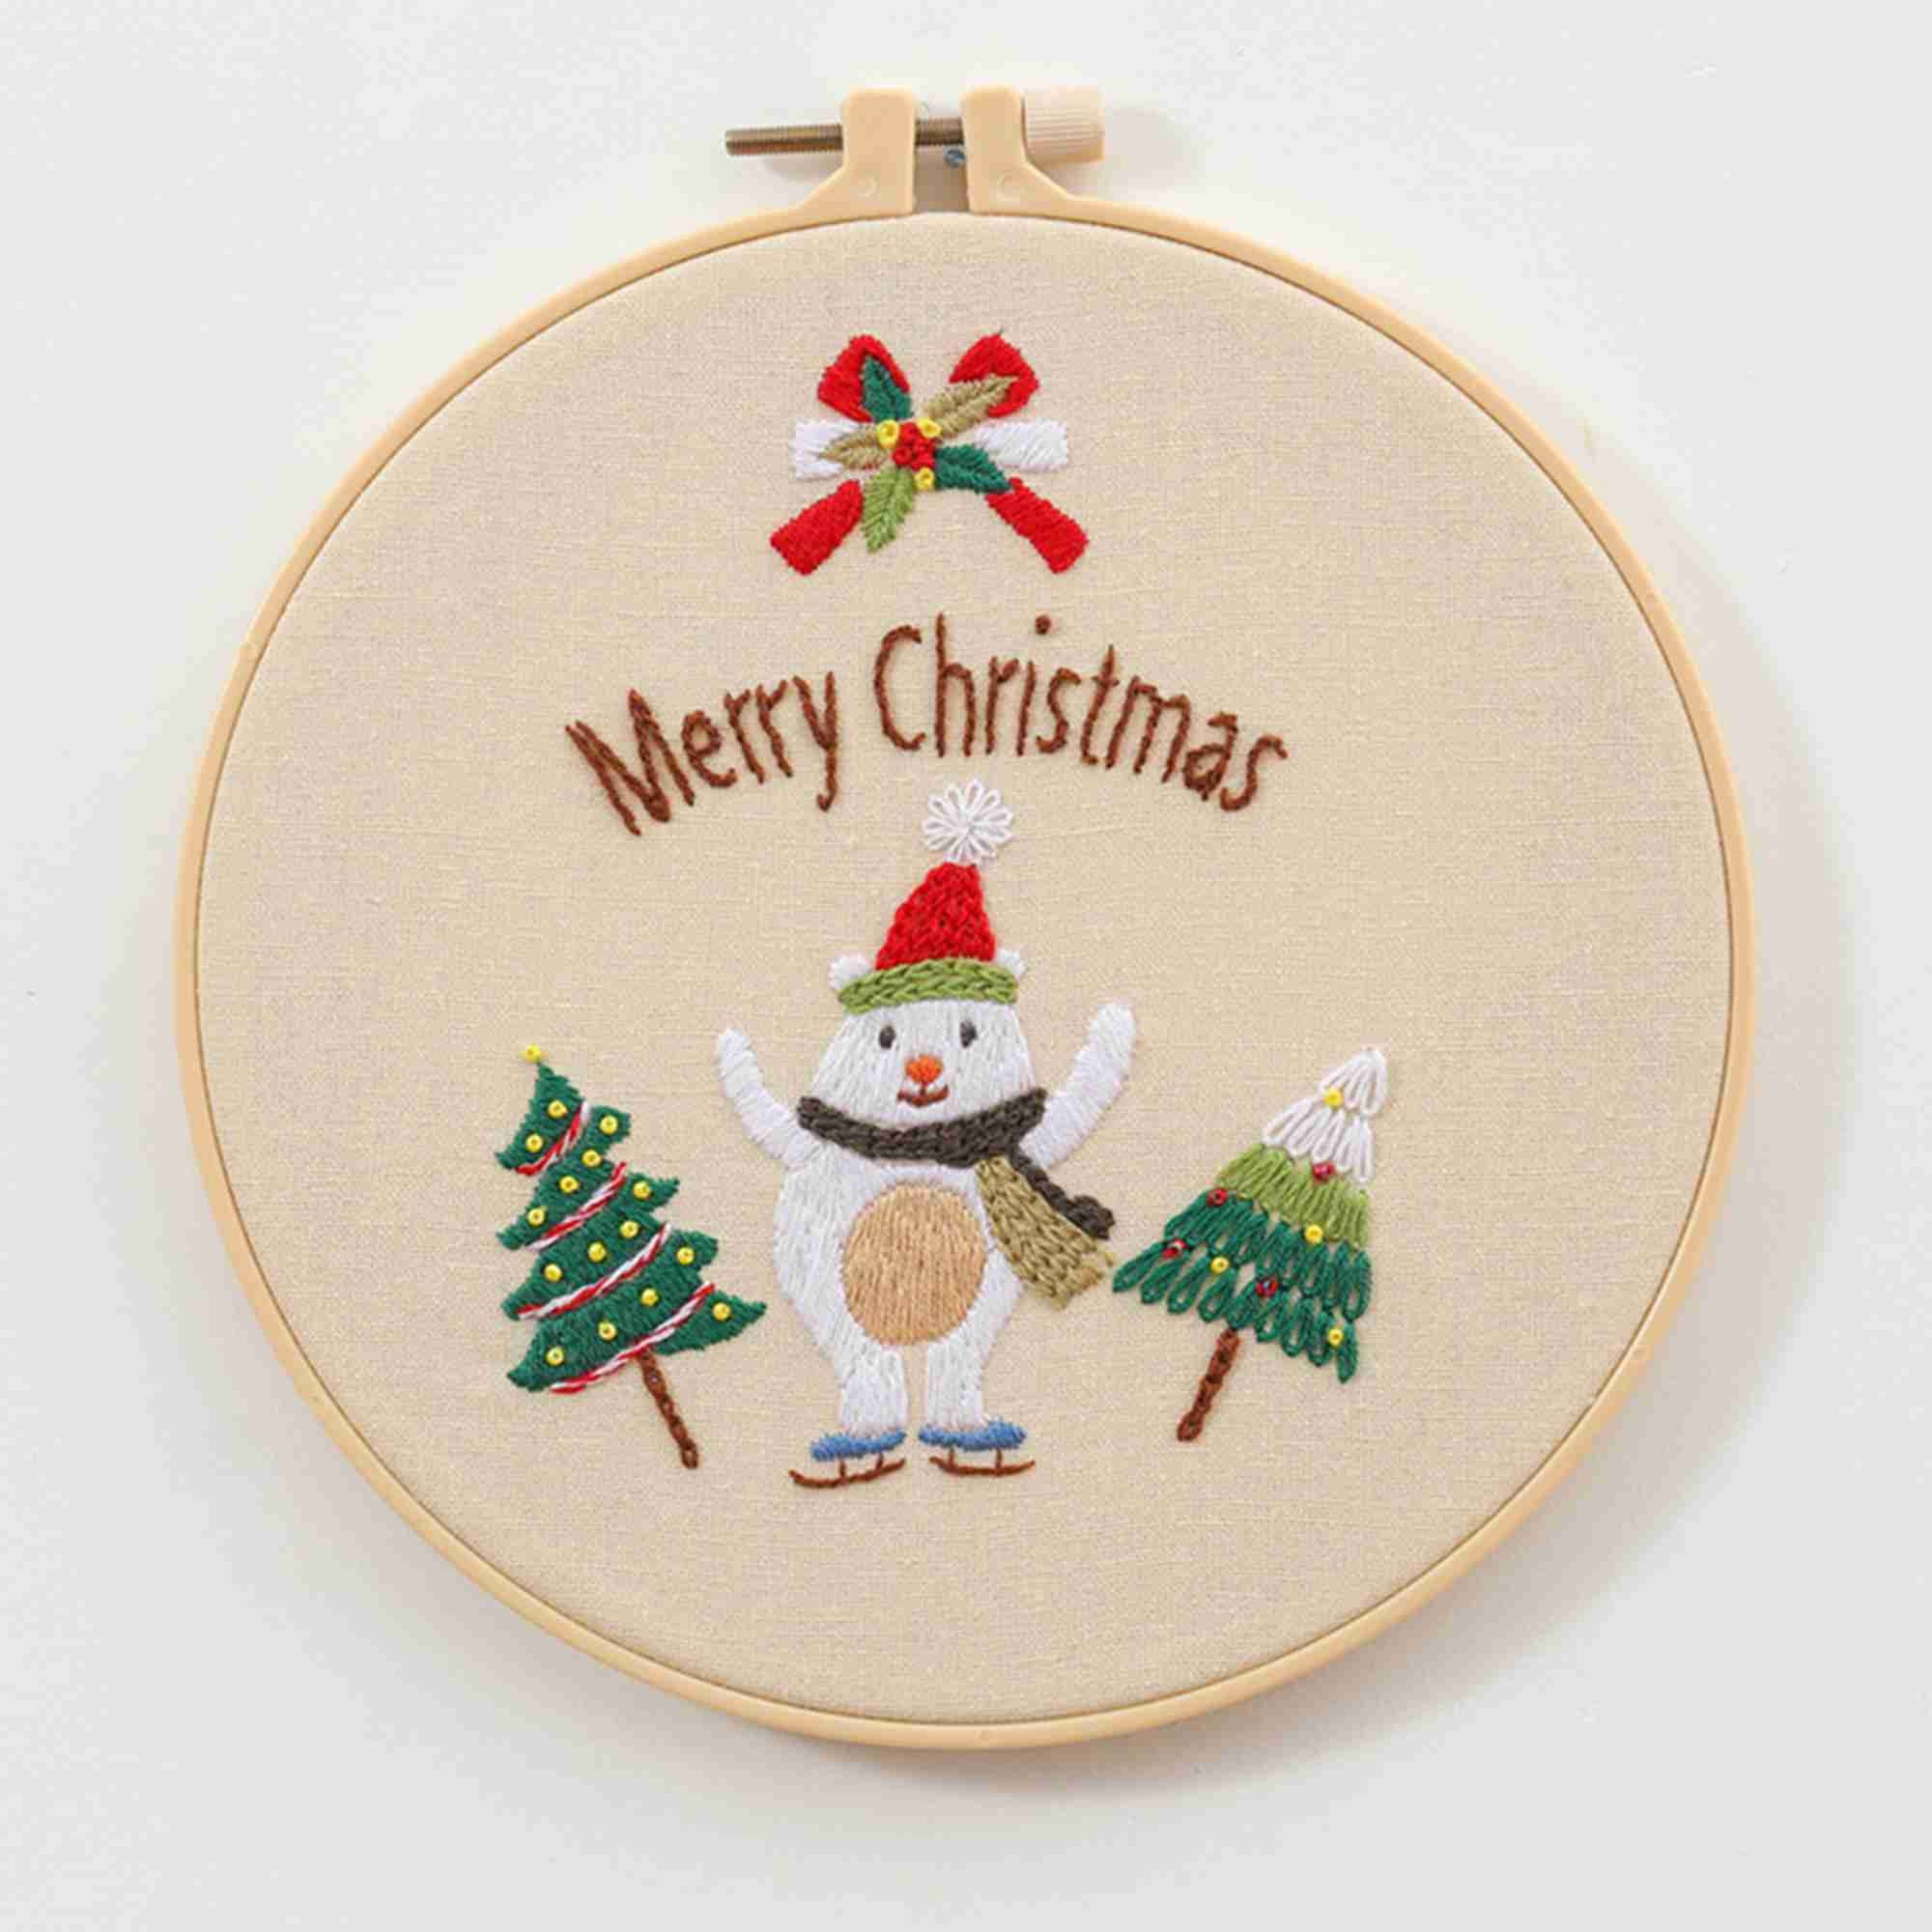 Christmas Embroidery Kit With Pattern, Embroidery Hoop, Color Threads Tools  Kit English Instruction for Beginners 8in/20cm 